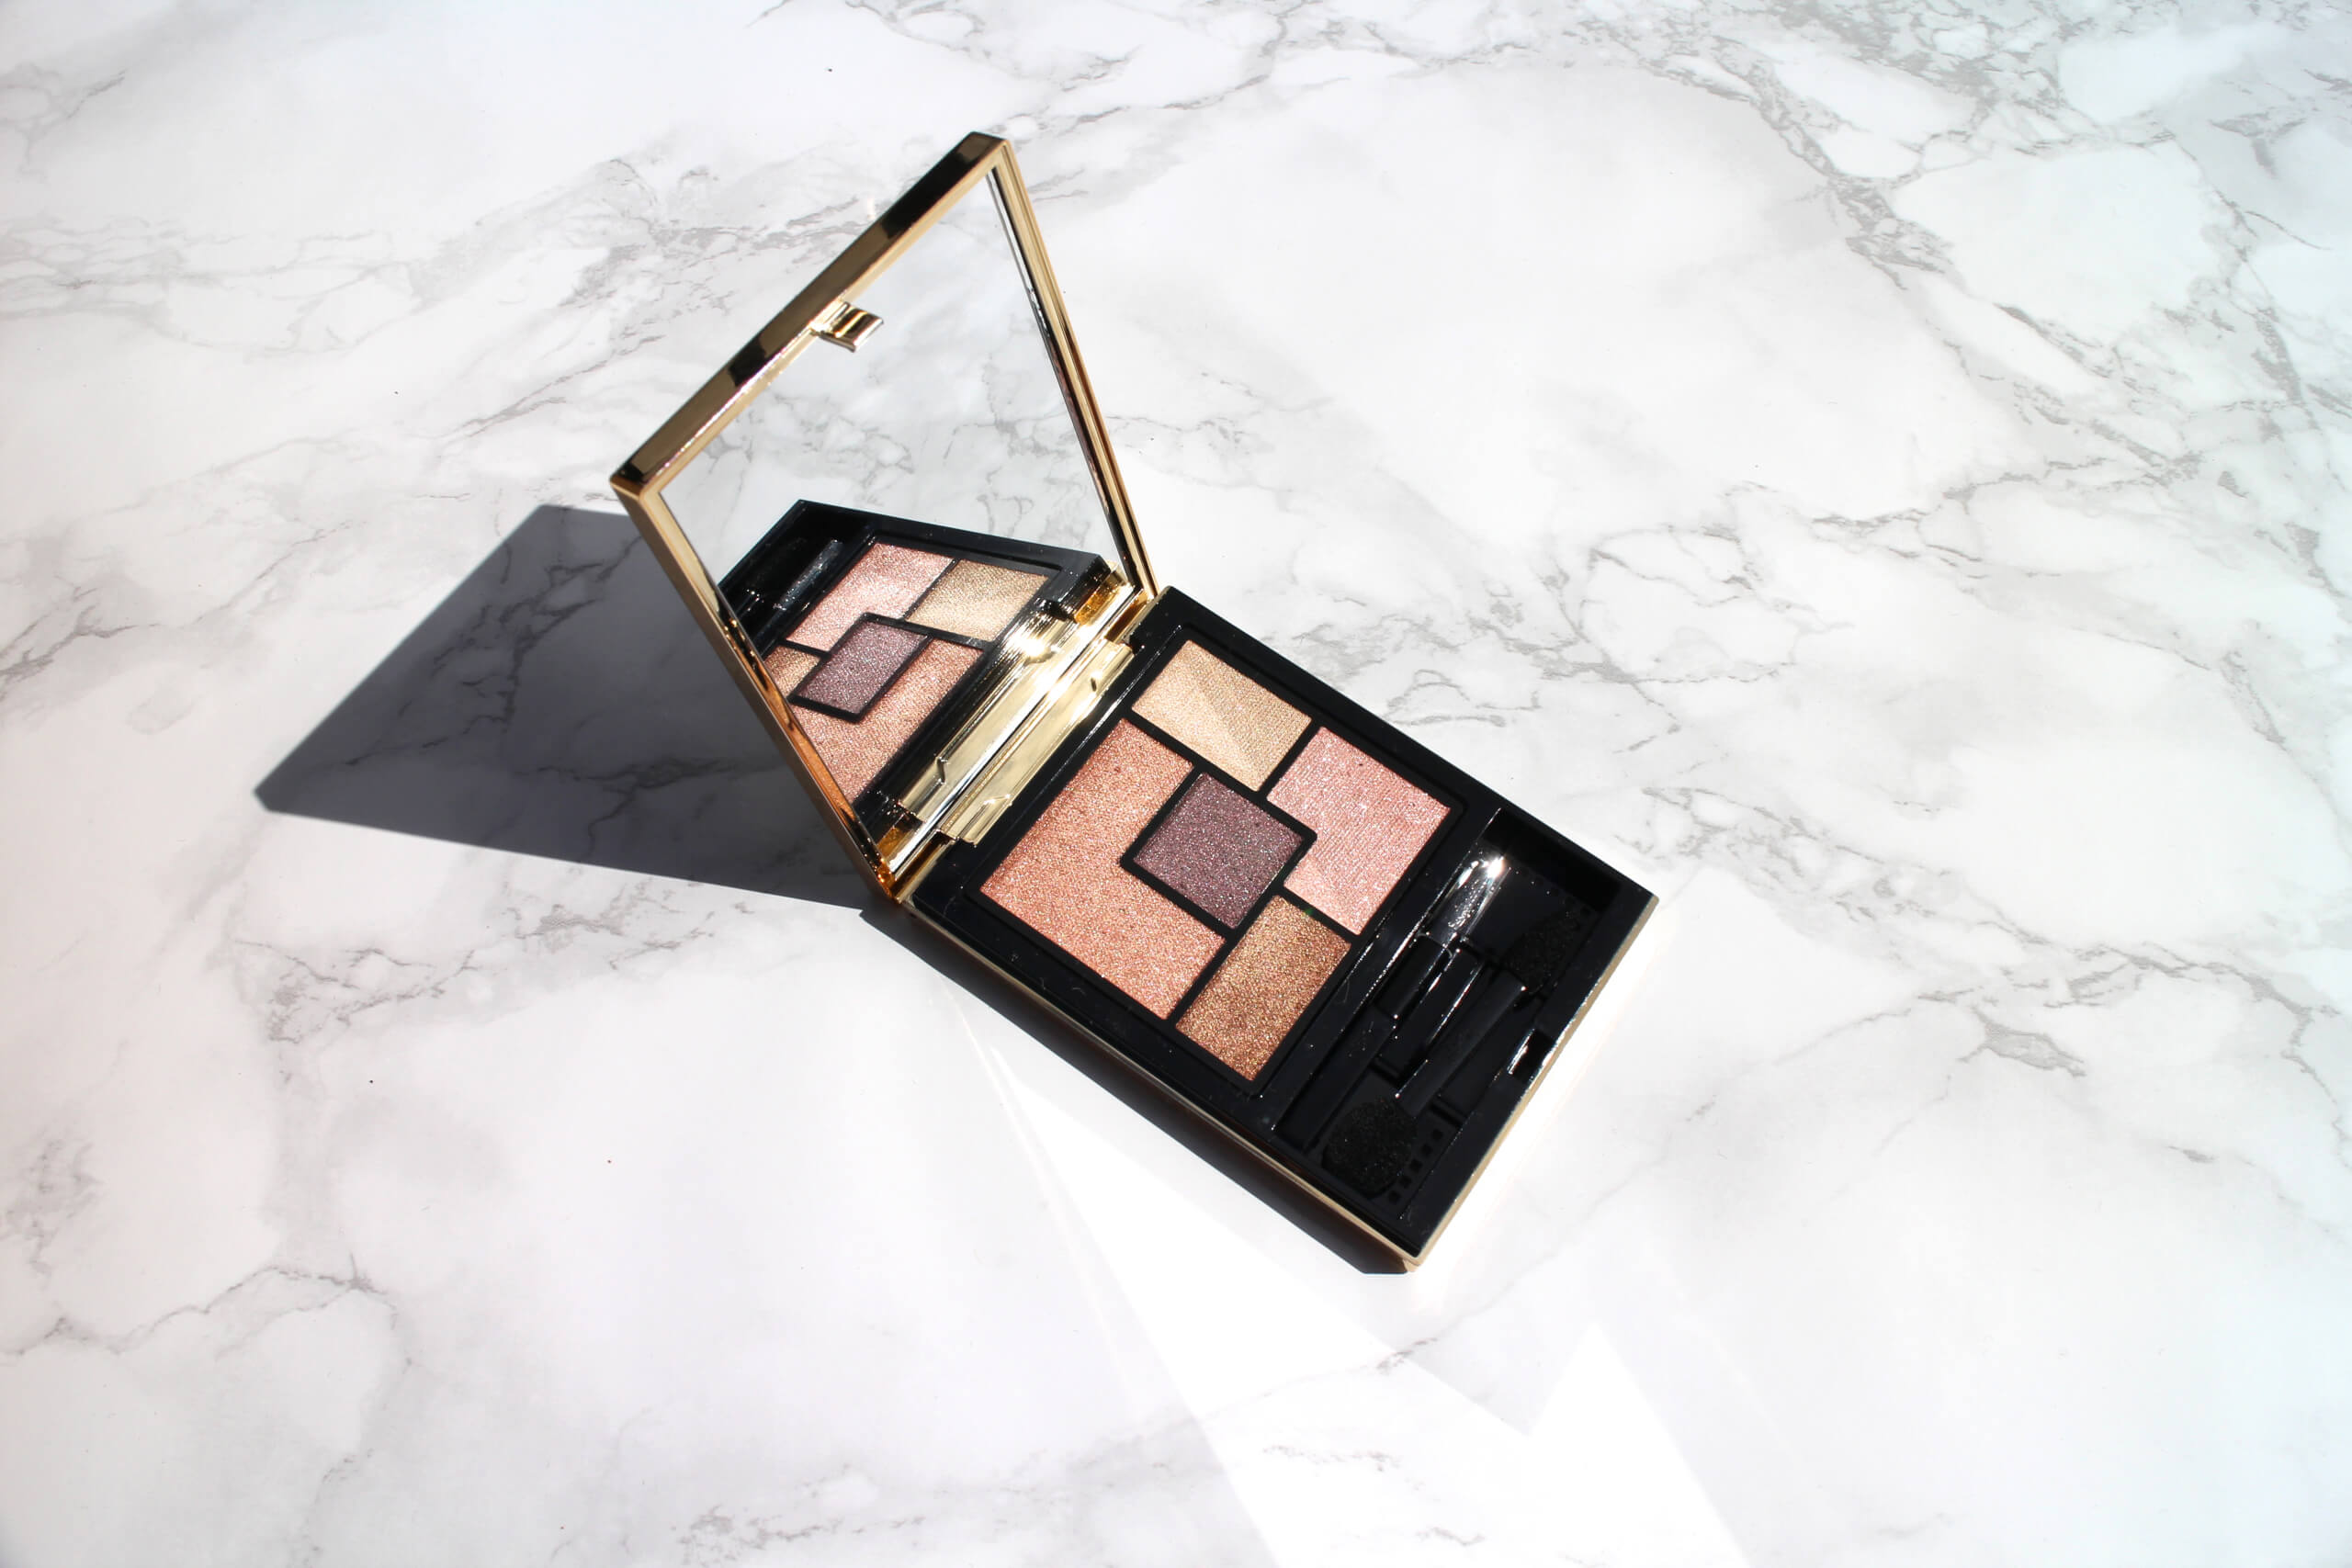 Summer Beauty, beauty, make up, make-up, makeup, beauty products, YSL EYE PALETTE COUTURE ABOUT TIME MAGAZINE EVERLASTING SUMMER BEAUTY PRODUCTS MAKEUP